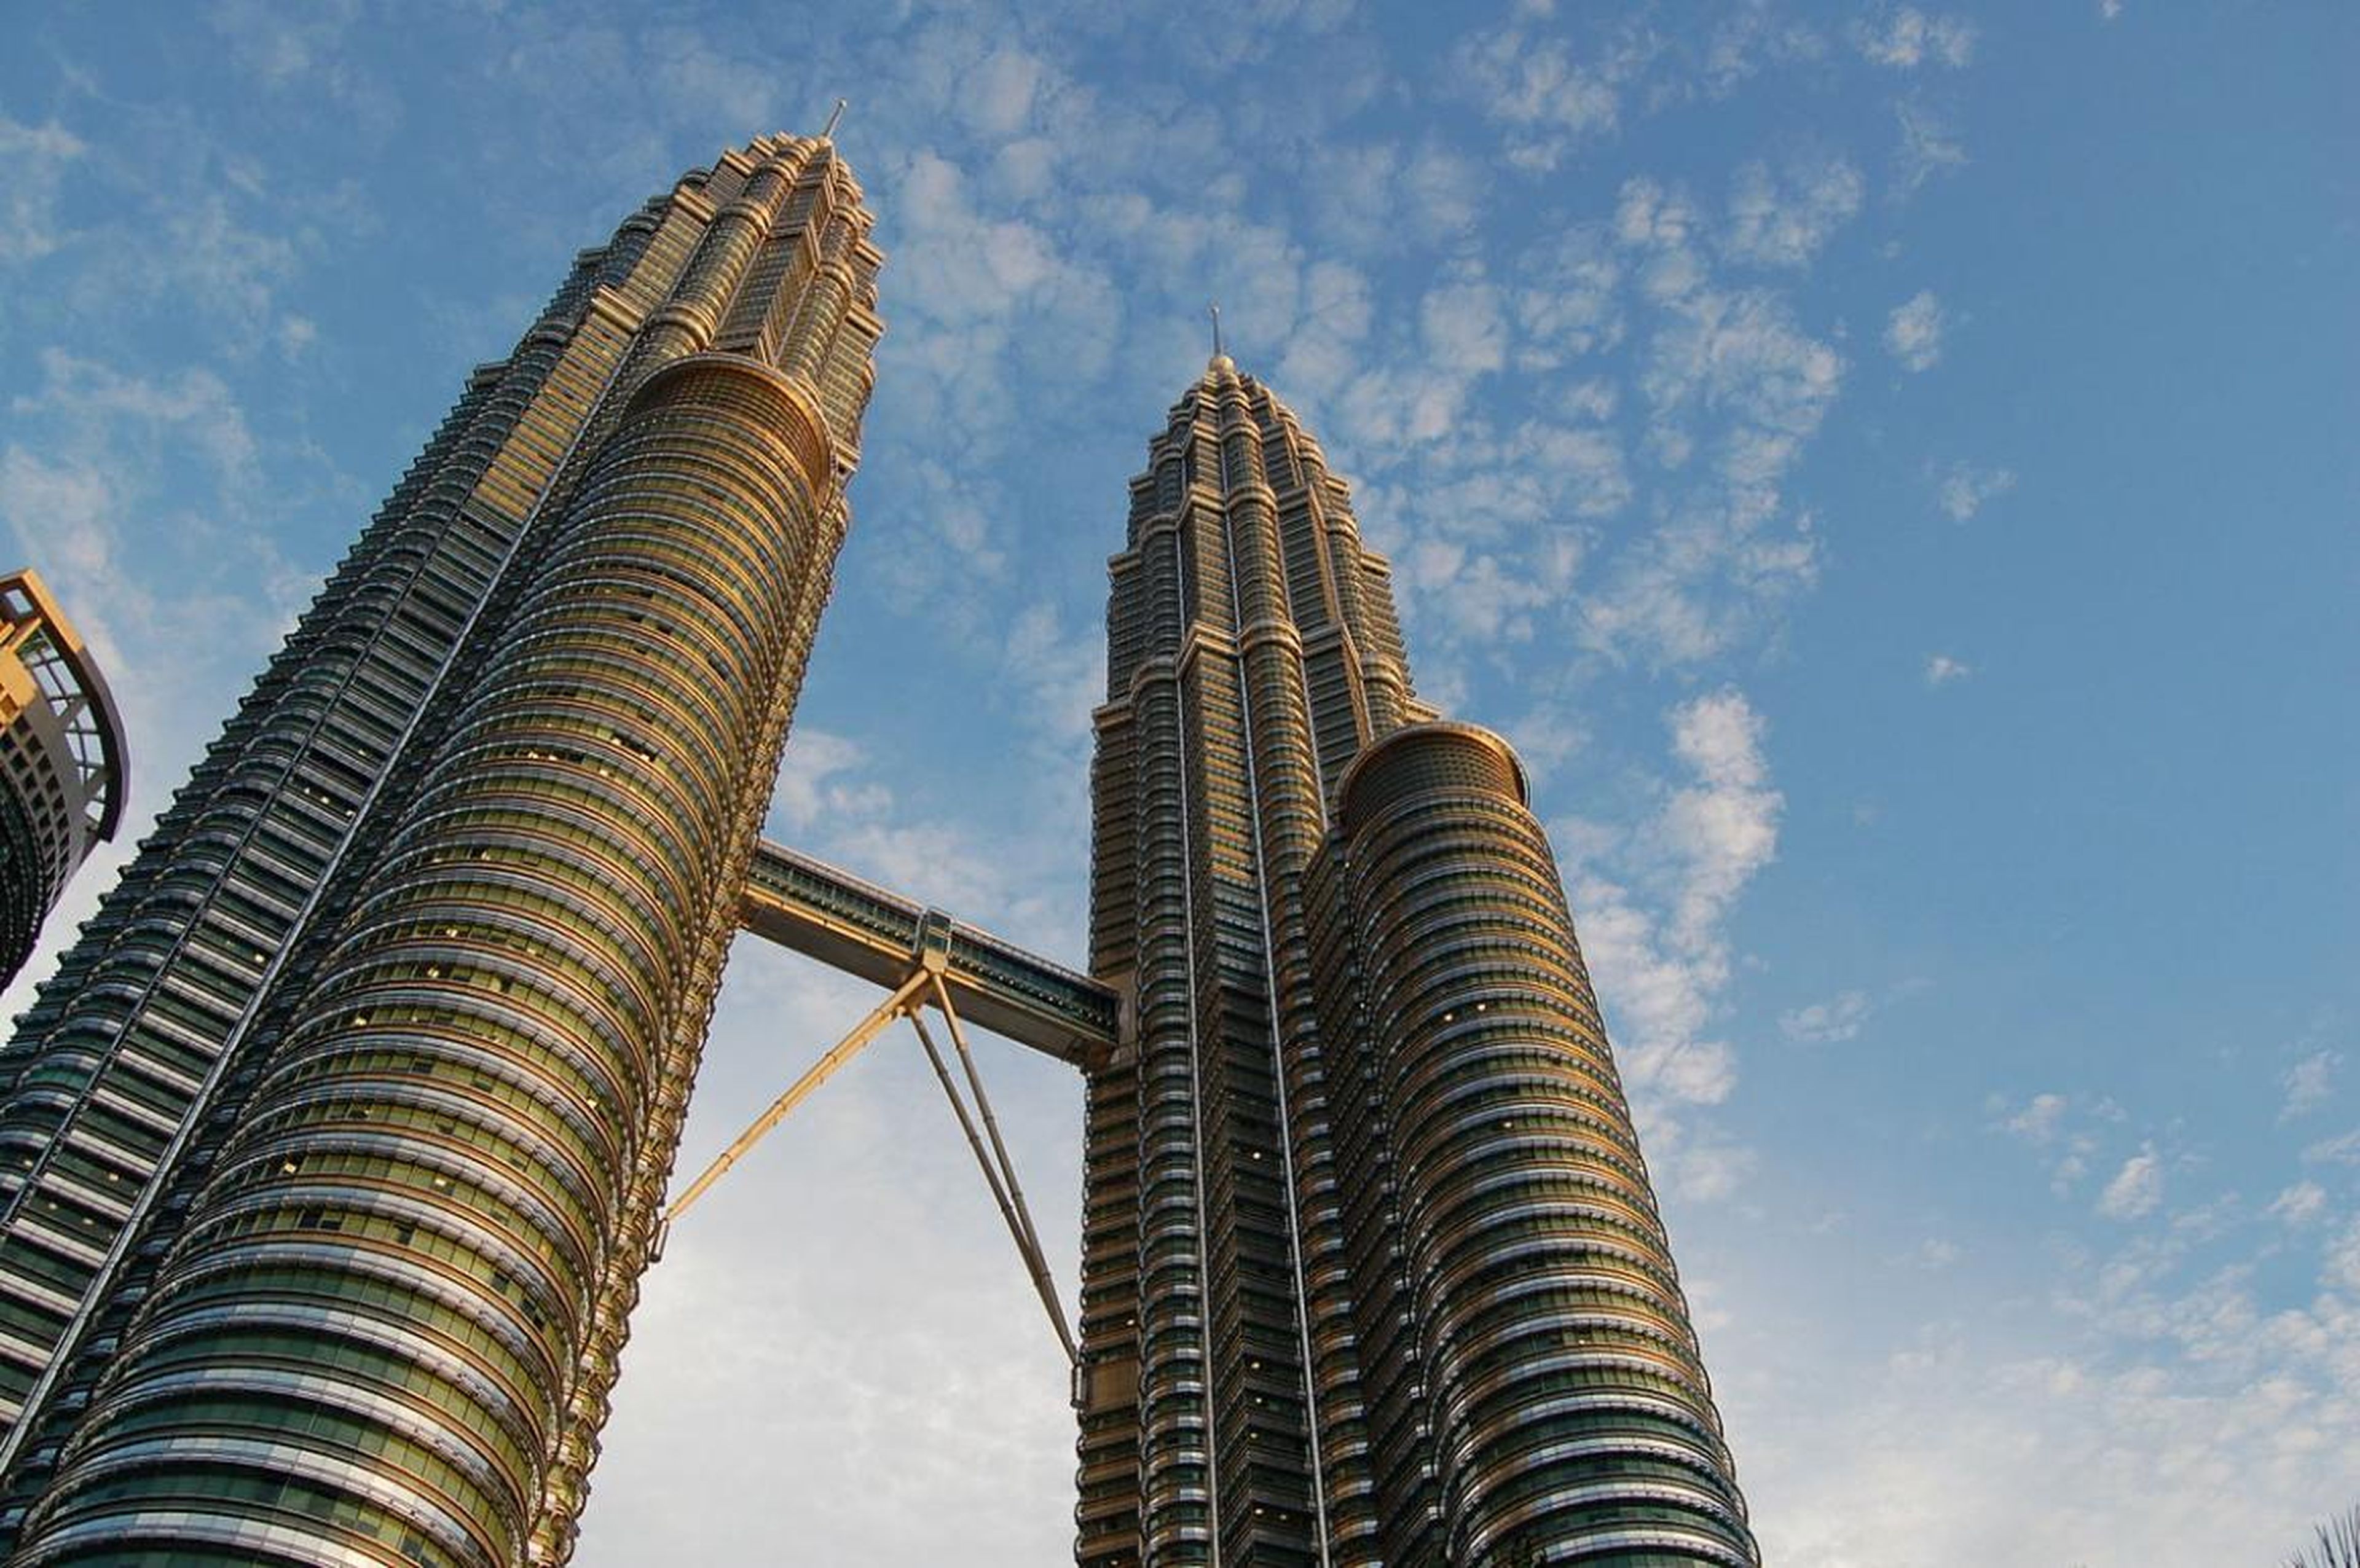 The Petronas Twin Towers, located in Malaysia, was constructed in 1999.